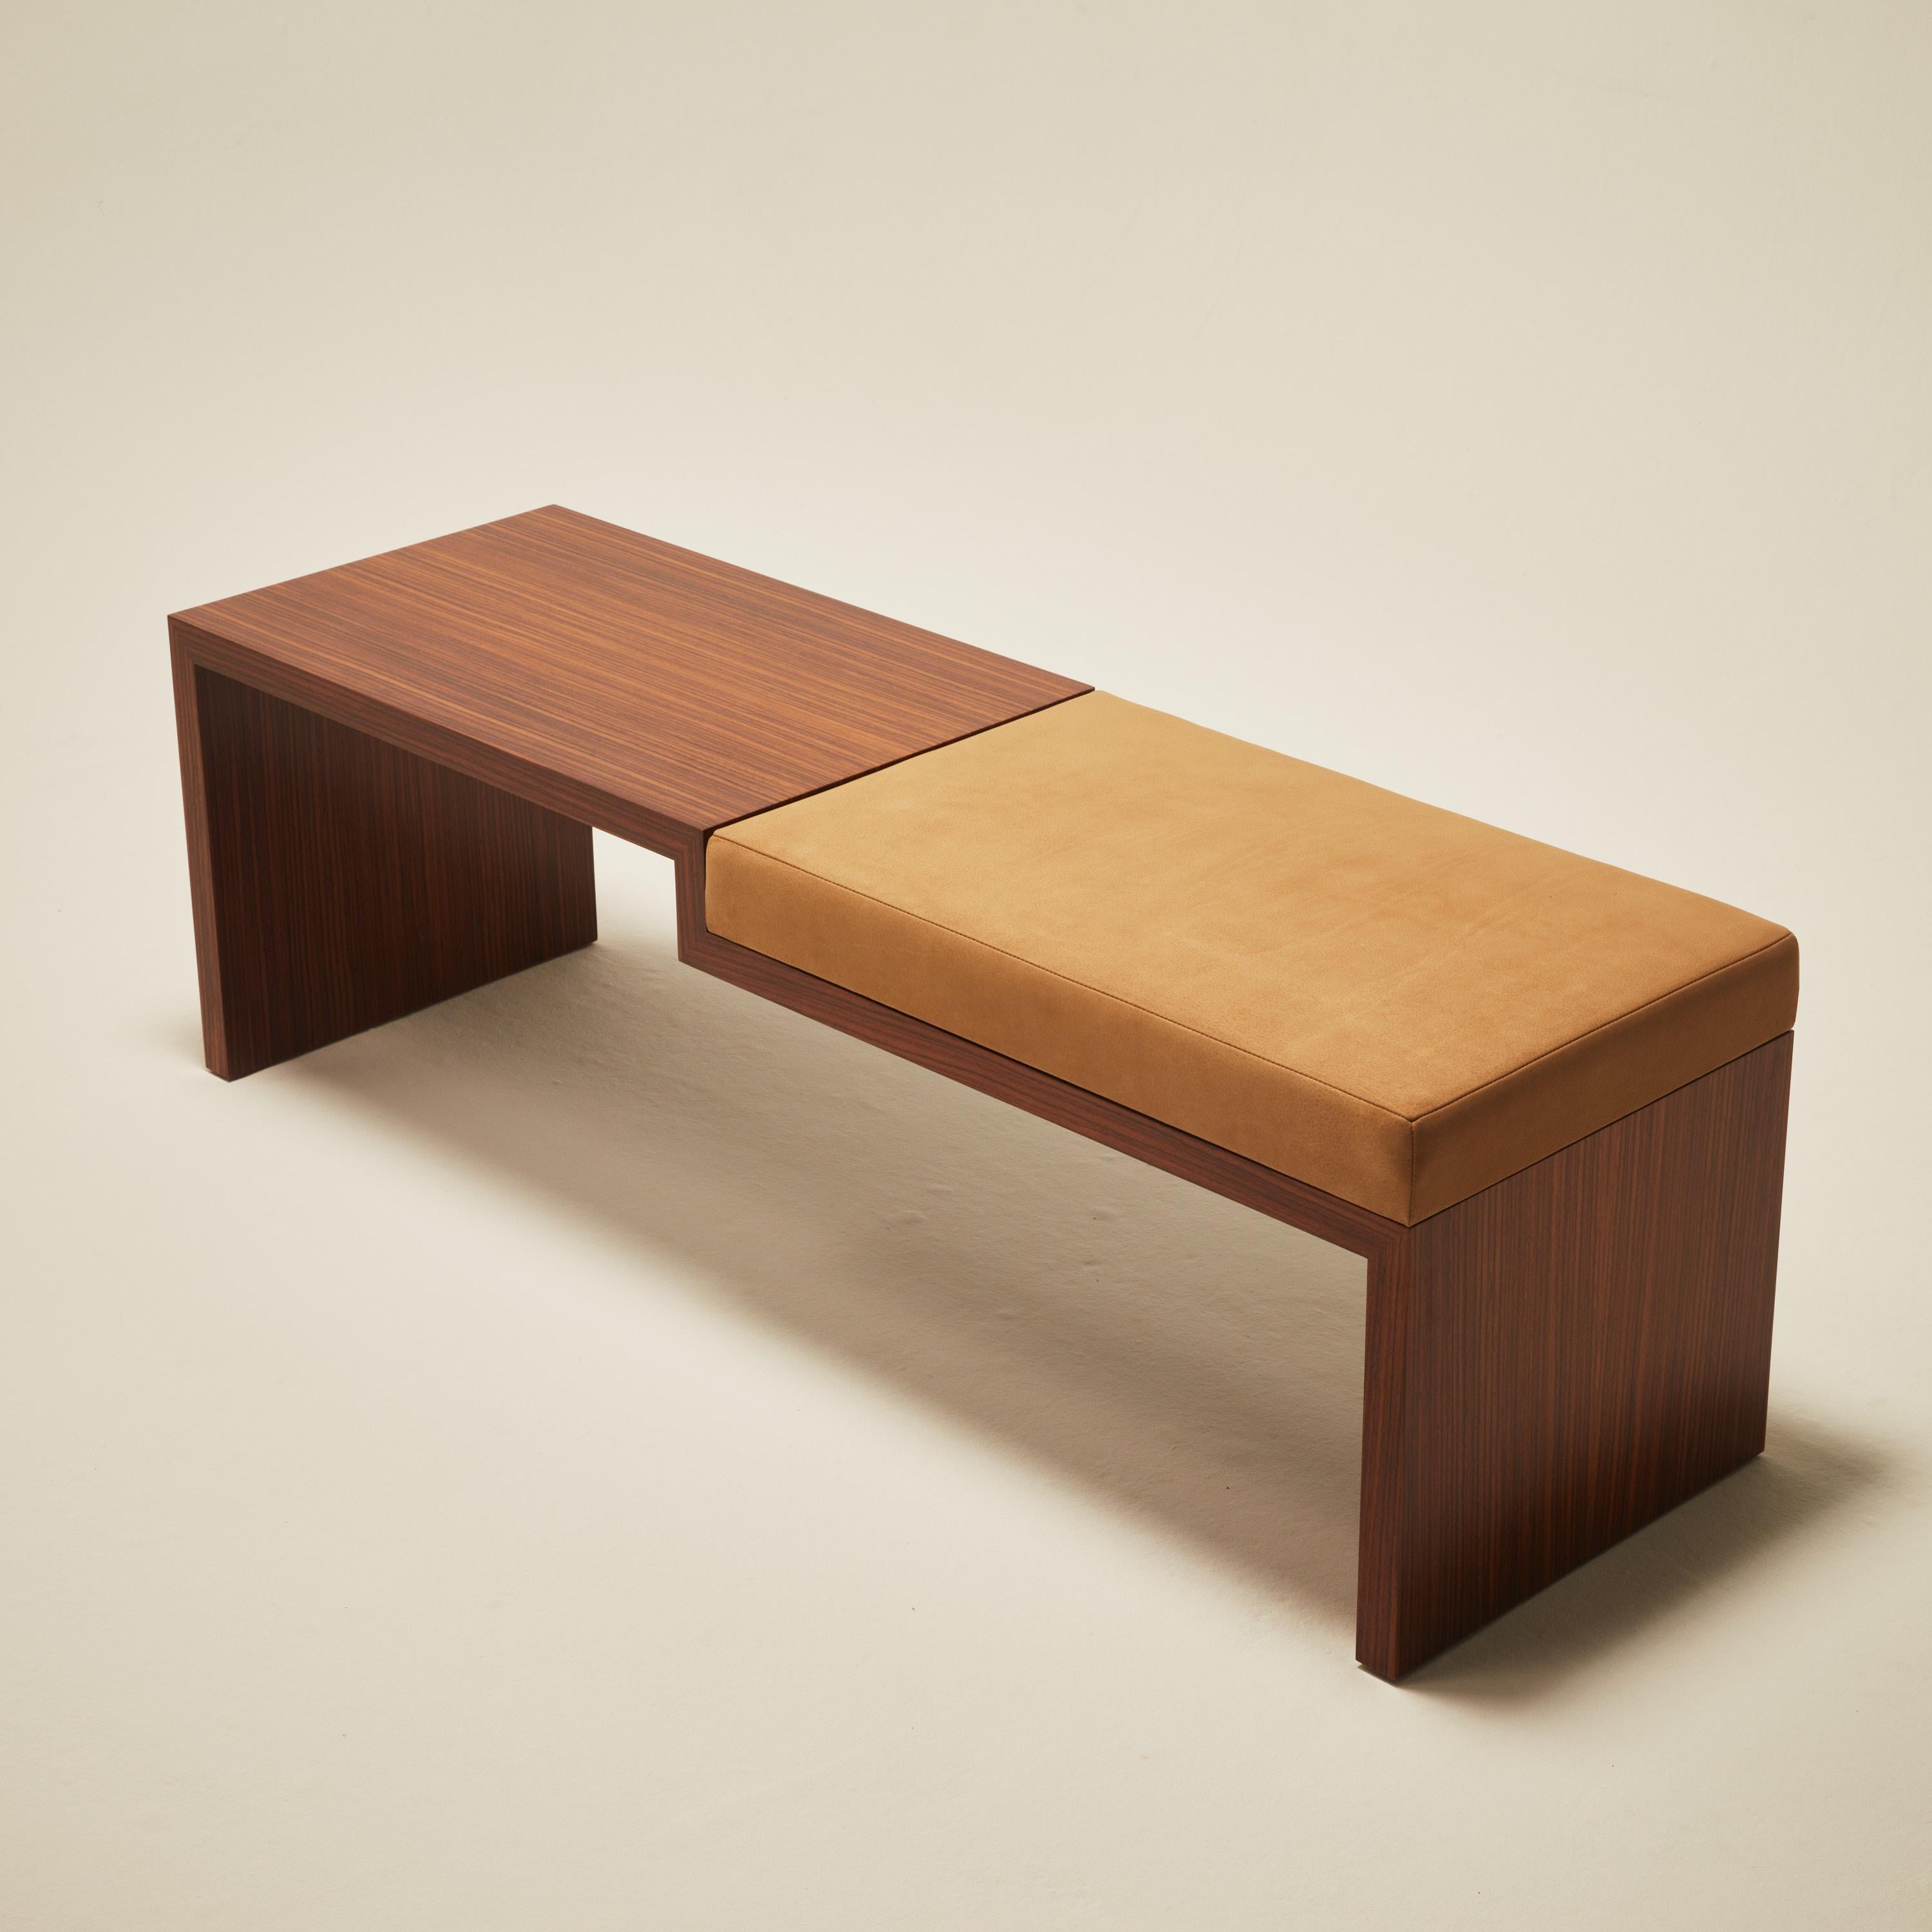 Veneer Continuous Bench - Hand applied wood veneer & leather upholstery For Sale